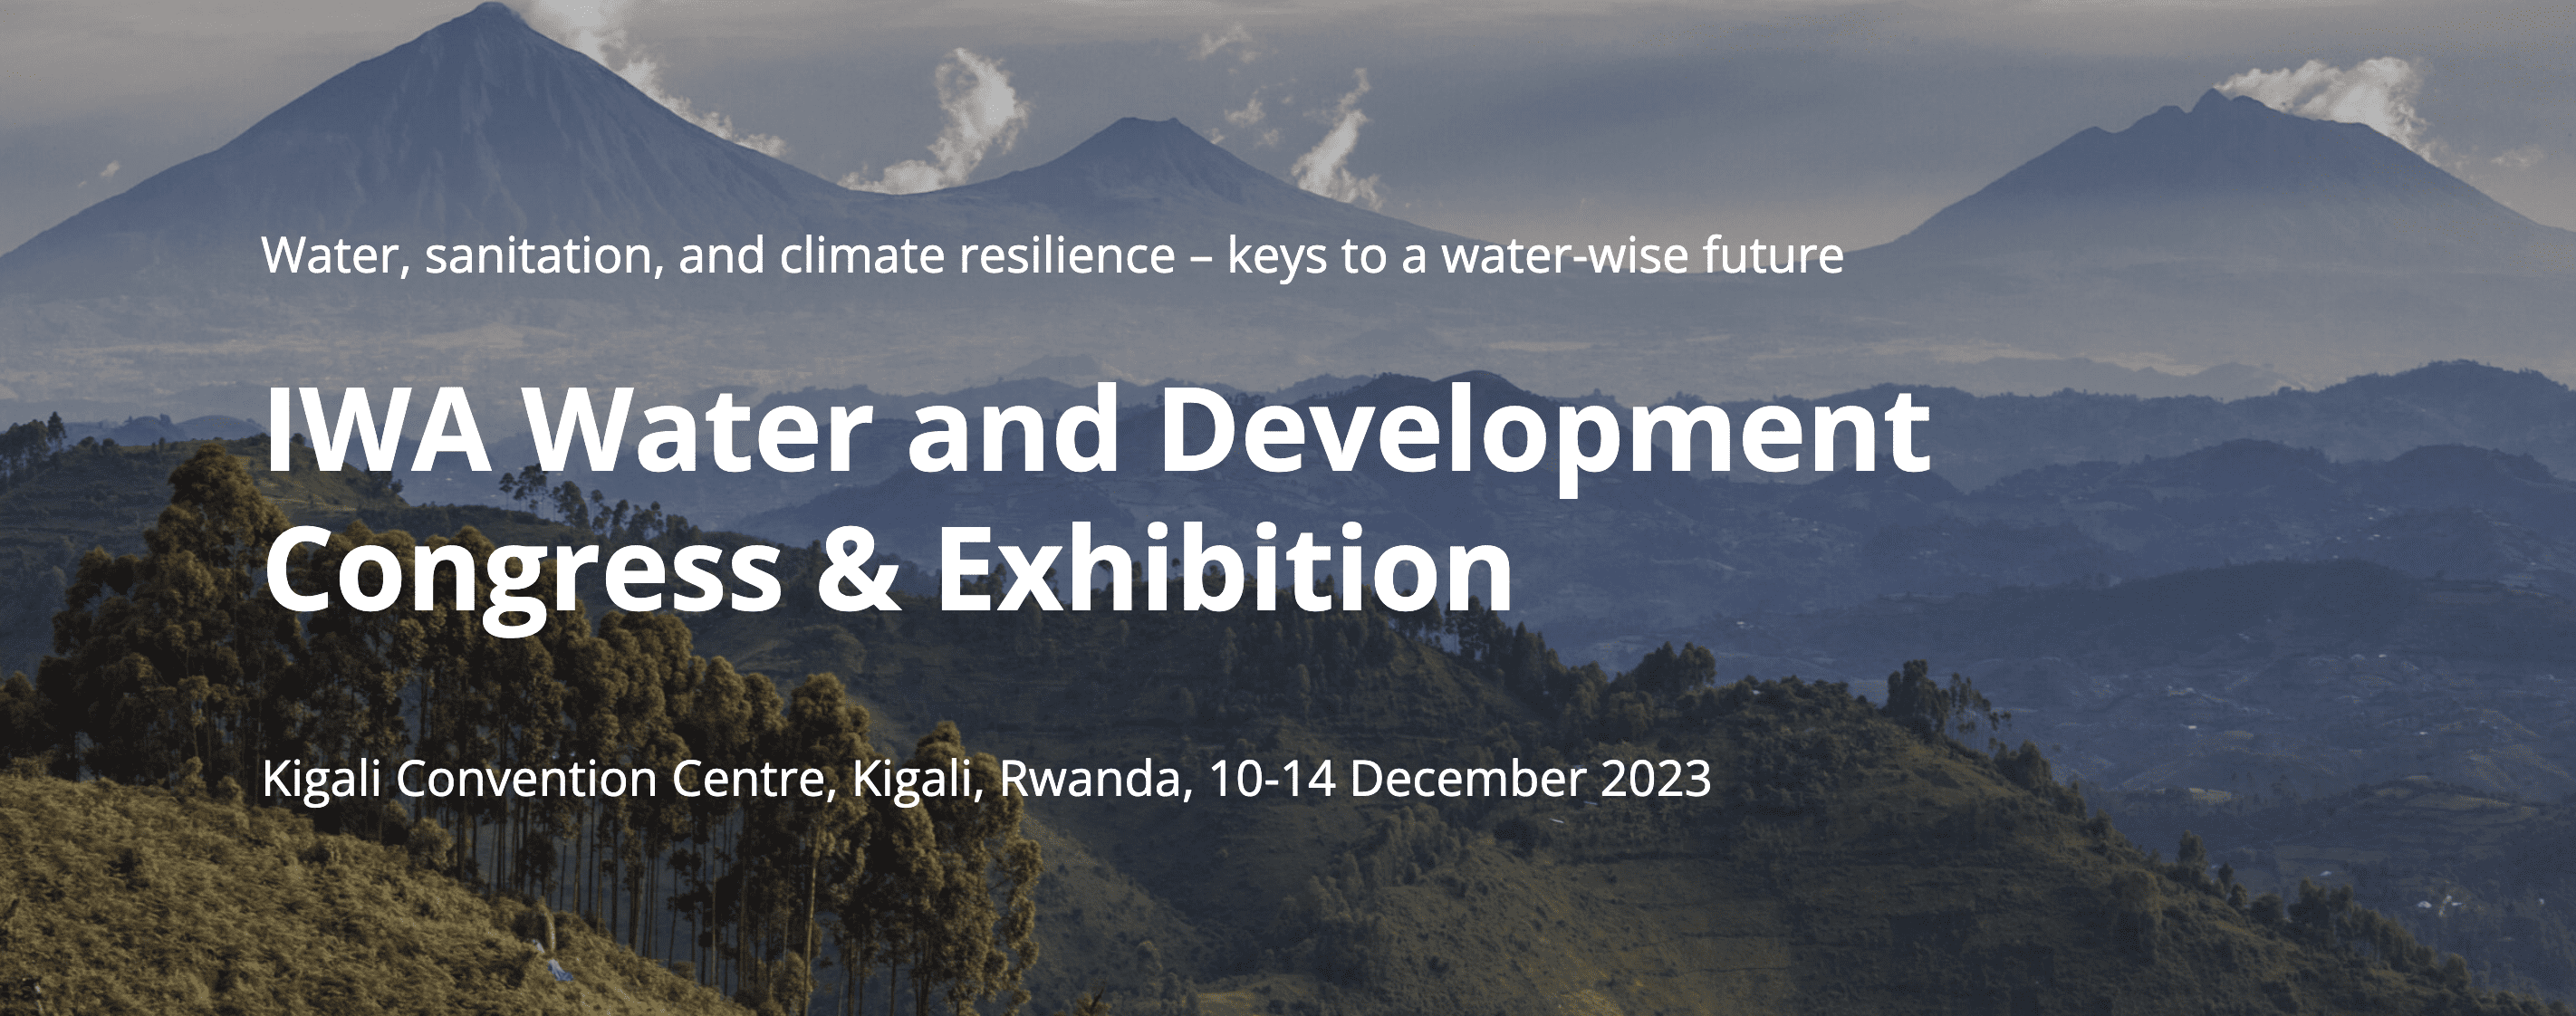 7th IWA Water and Development Congress & Exhibition 2023